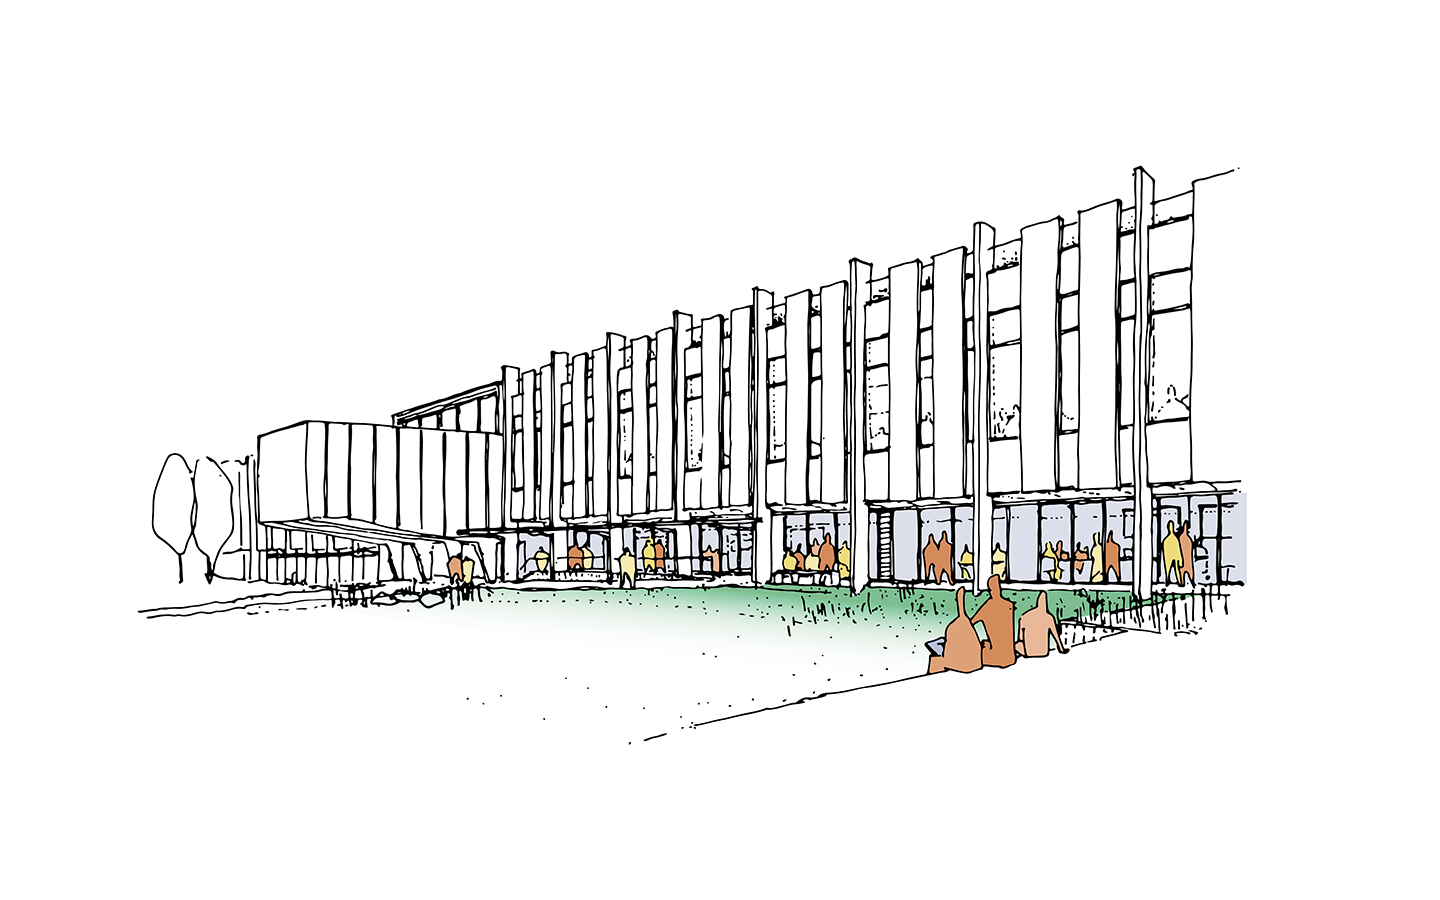 Illustration of a building from the campus development plan